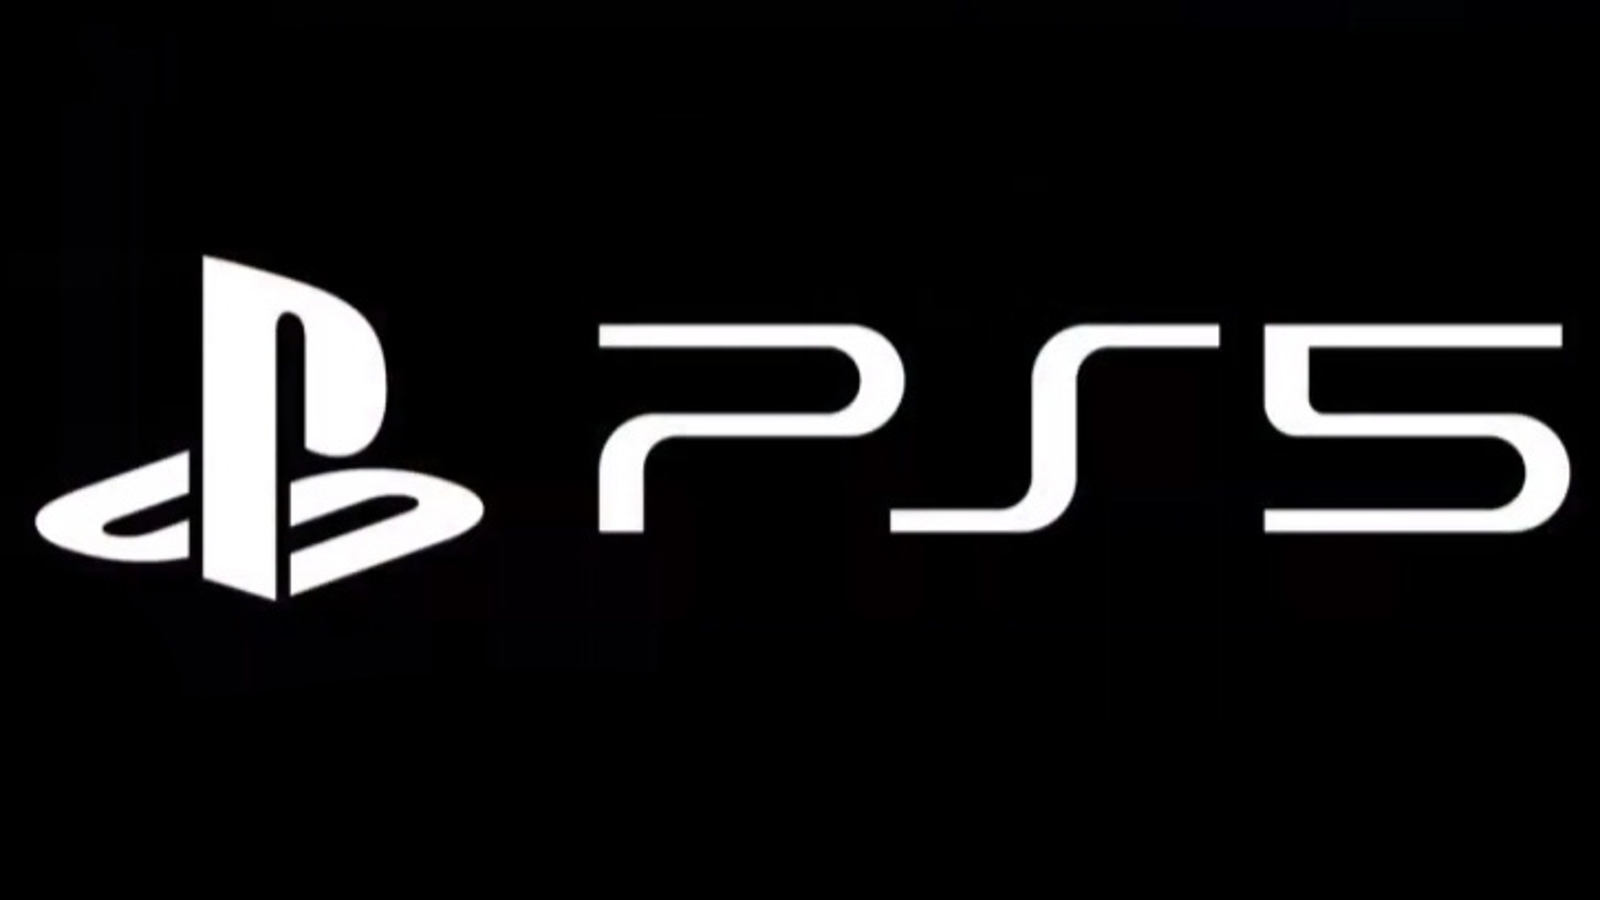 How to change your PS5 name